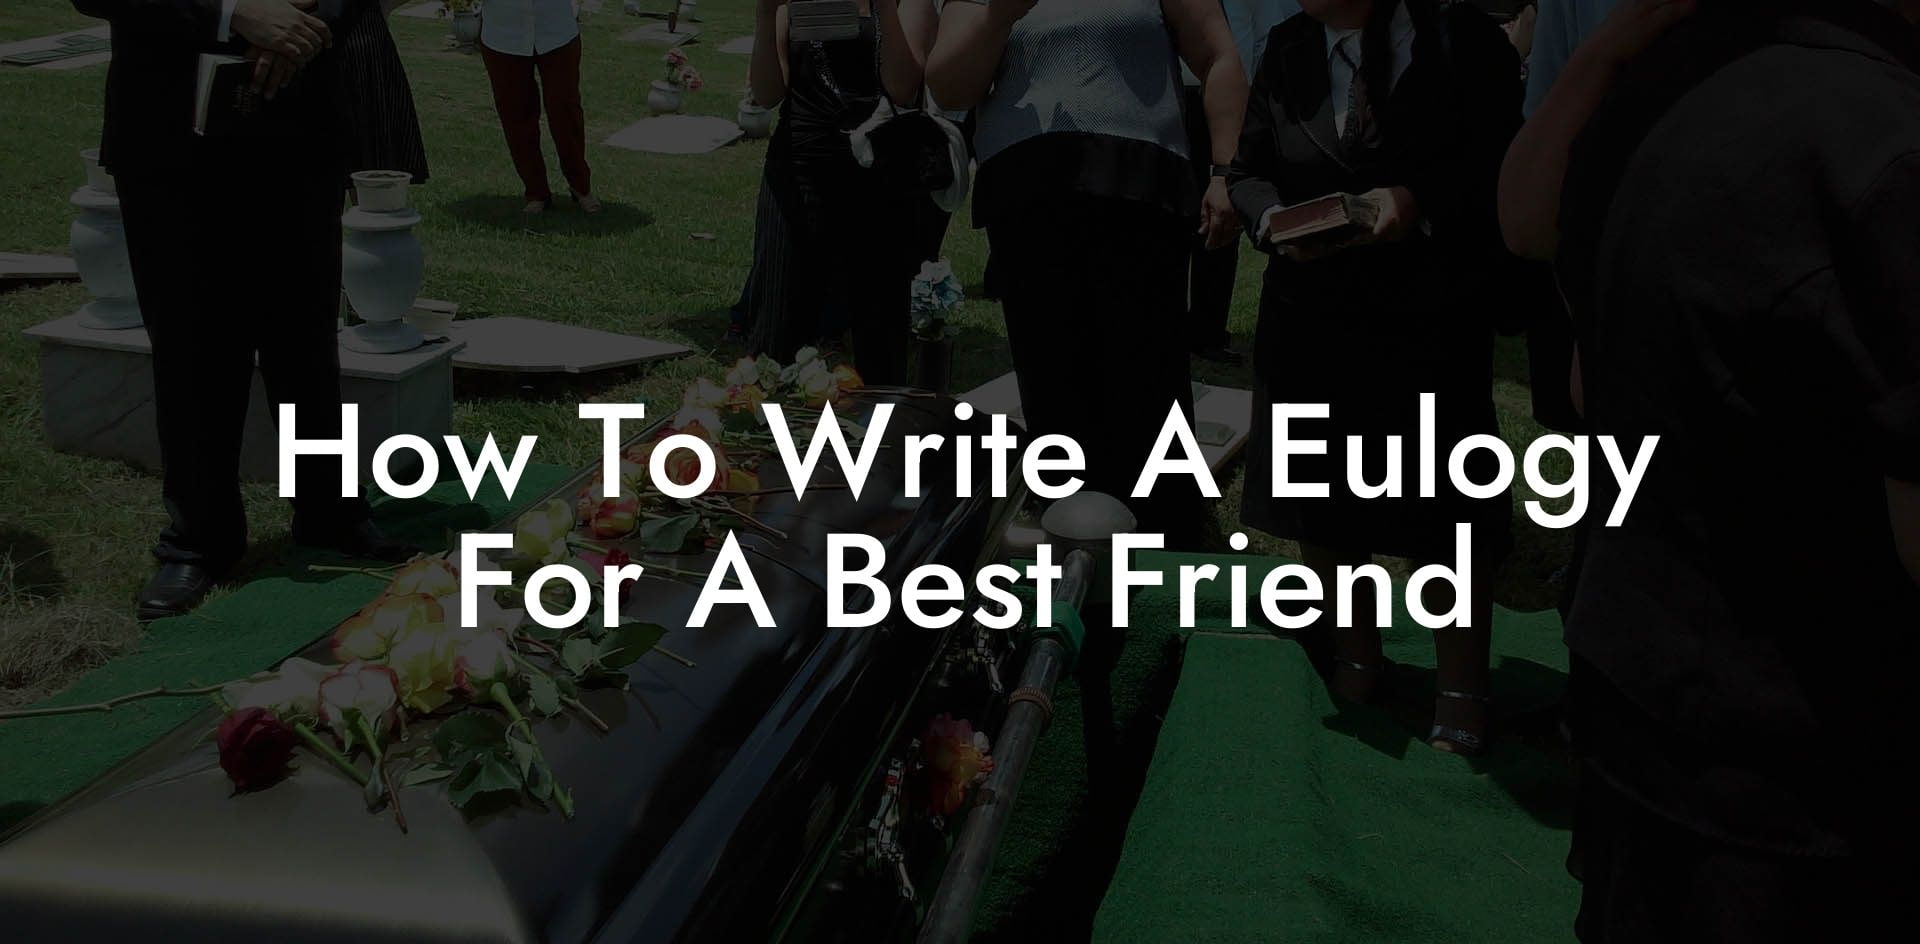 How To Write A Eulogy For A Best Friend